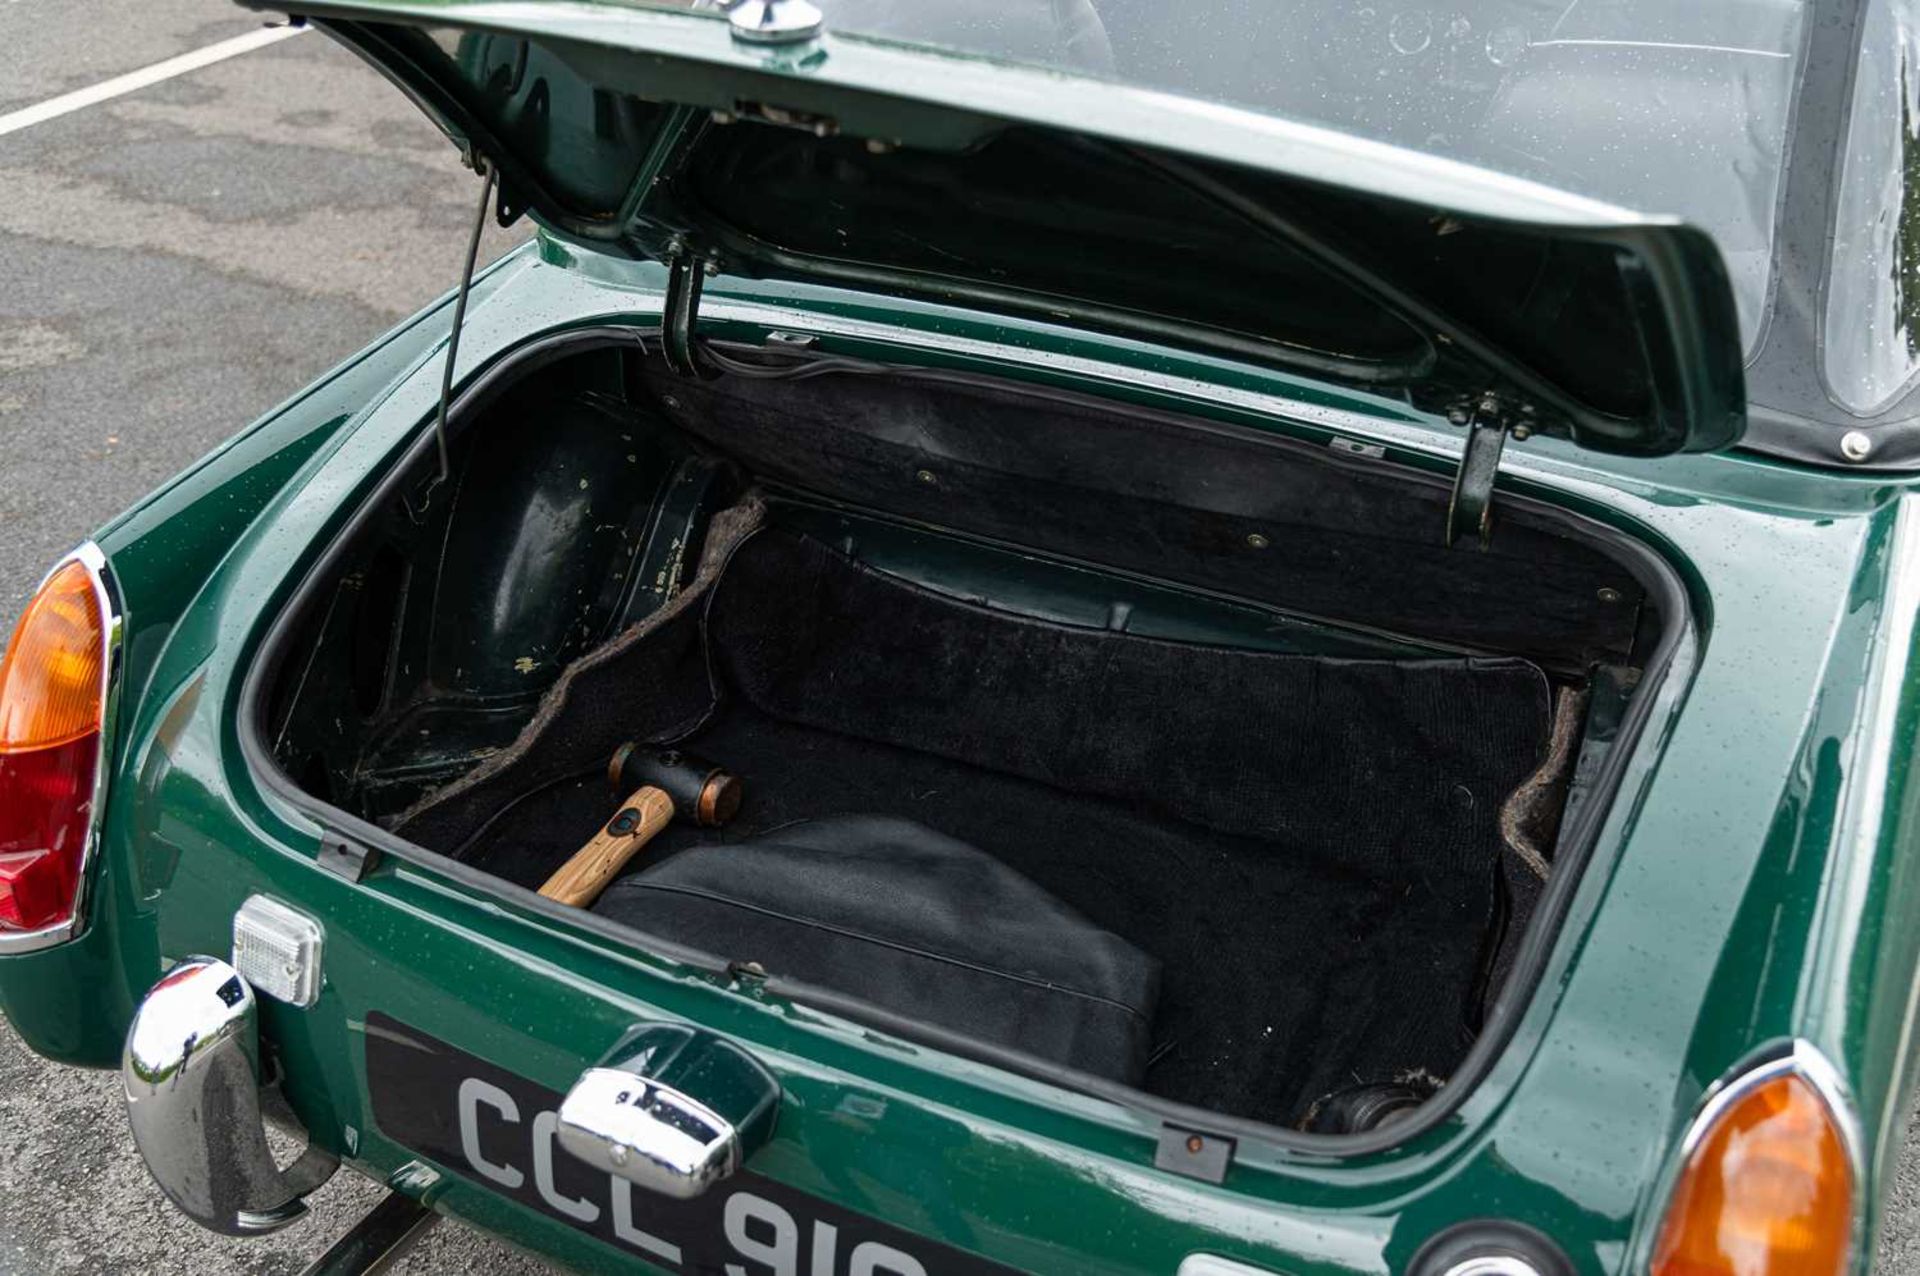 1965 Austin-Healey Sprite Formerly the property of British Formula One racing driver David Piper - Image 63 of 71